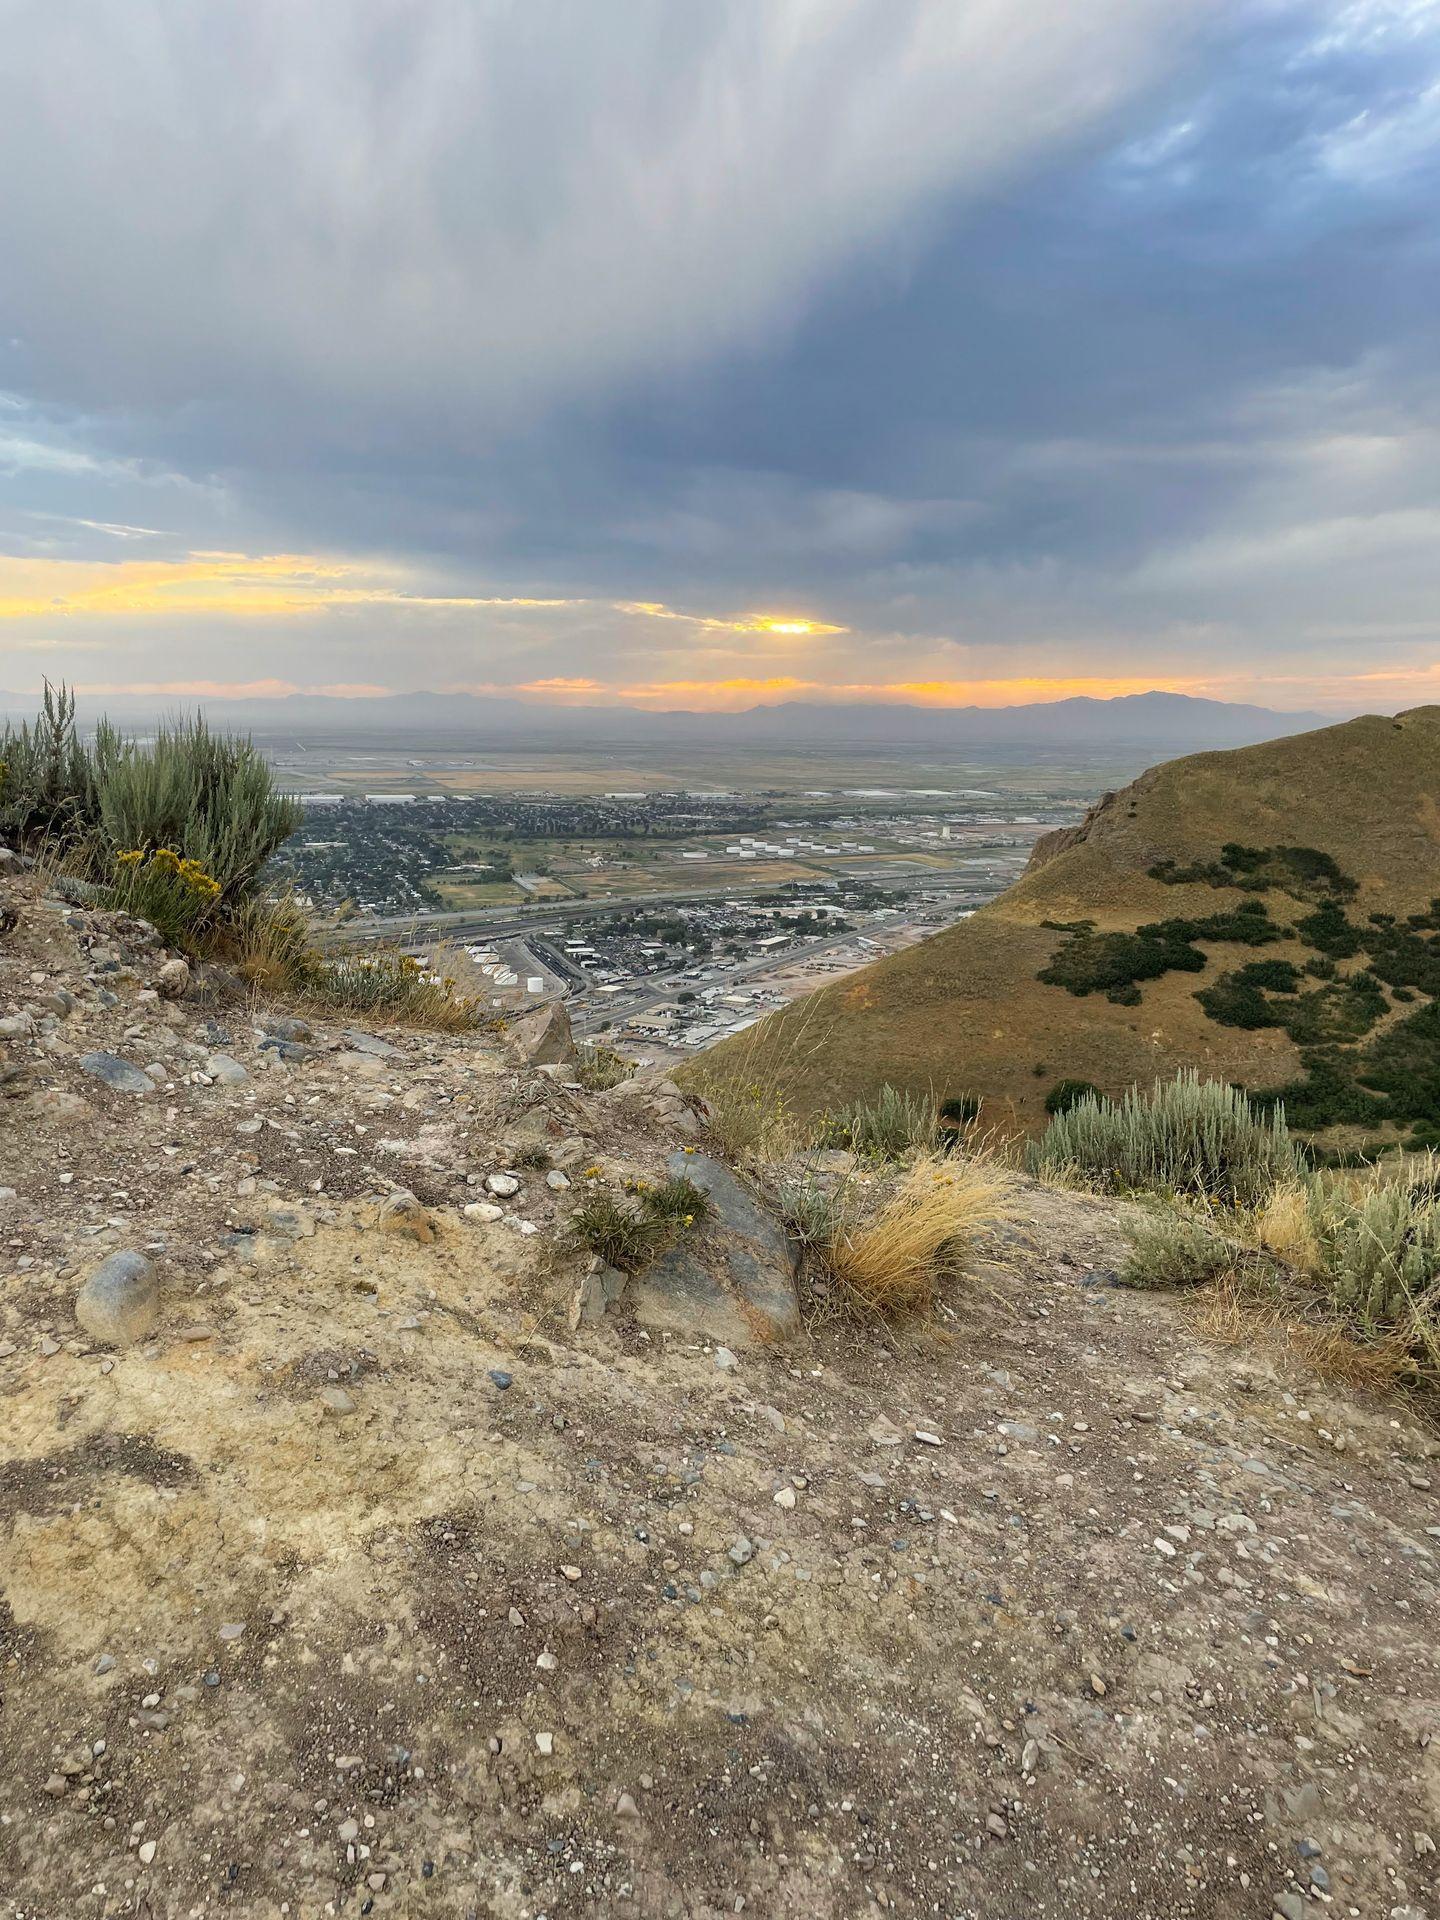 A view looking down at the city from Ensign Peak at sunset.